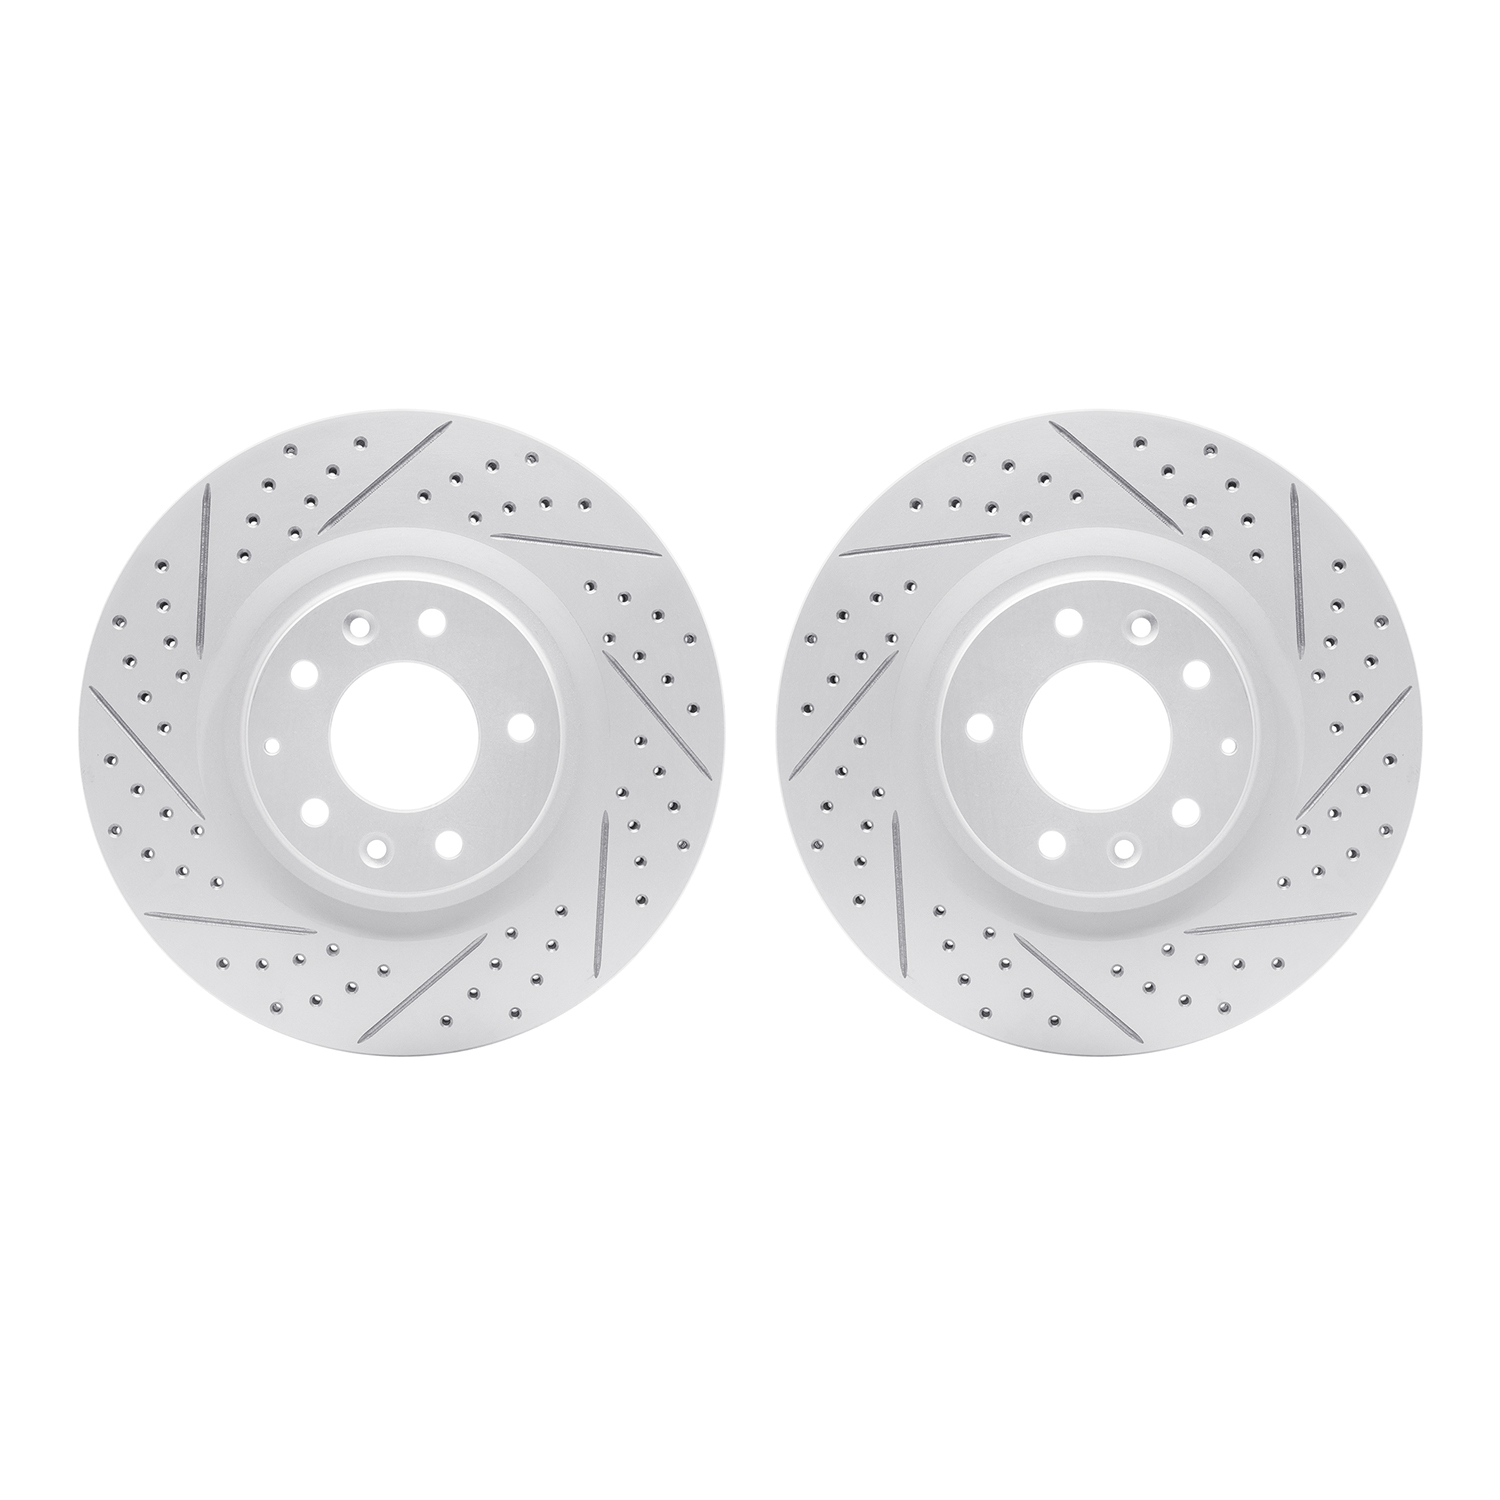 2002-80027 Geoperformance Drilled/Slotted Brake Rotors, 2004-2011 Ford/Lincoln/Mercury/Mazda, Position: Front